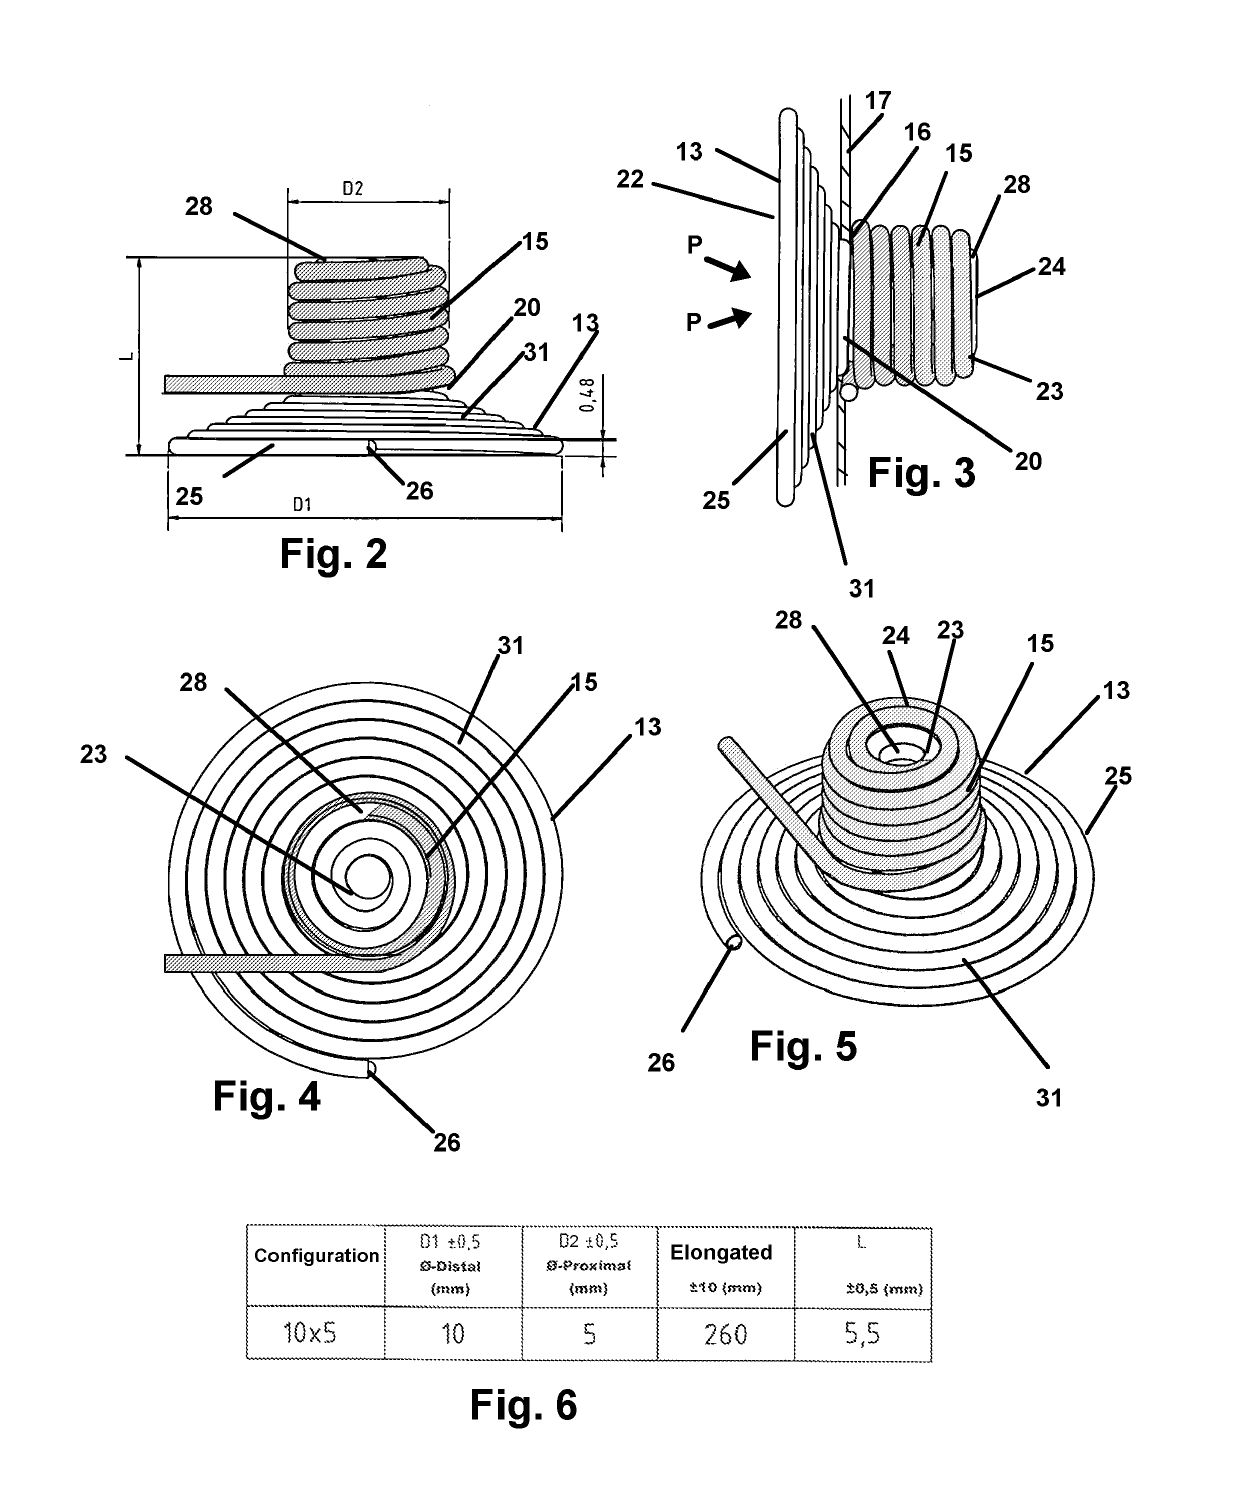 Vascular occlusion device configured for infants